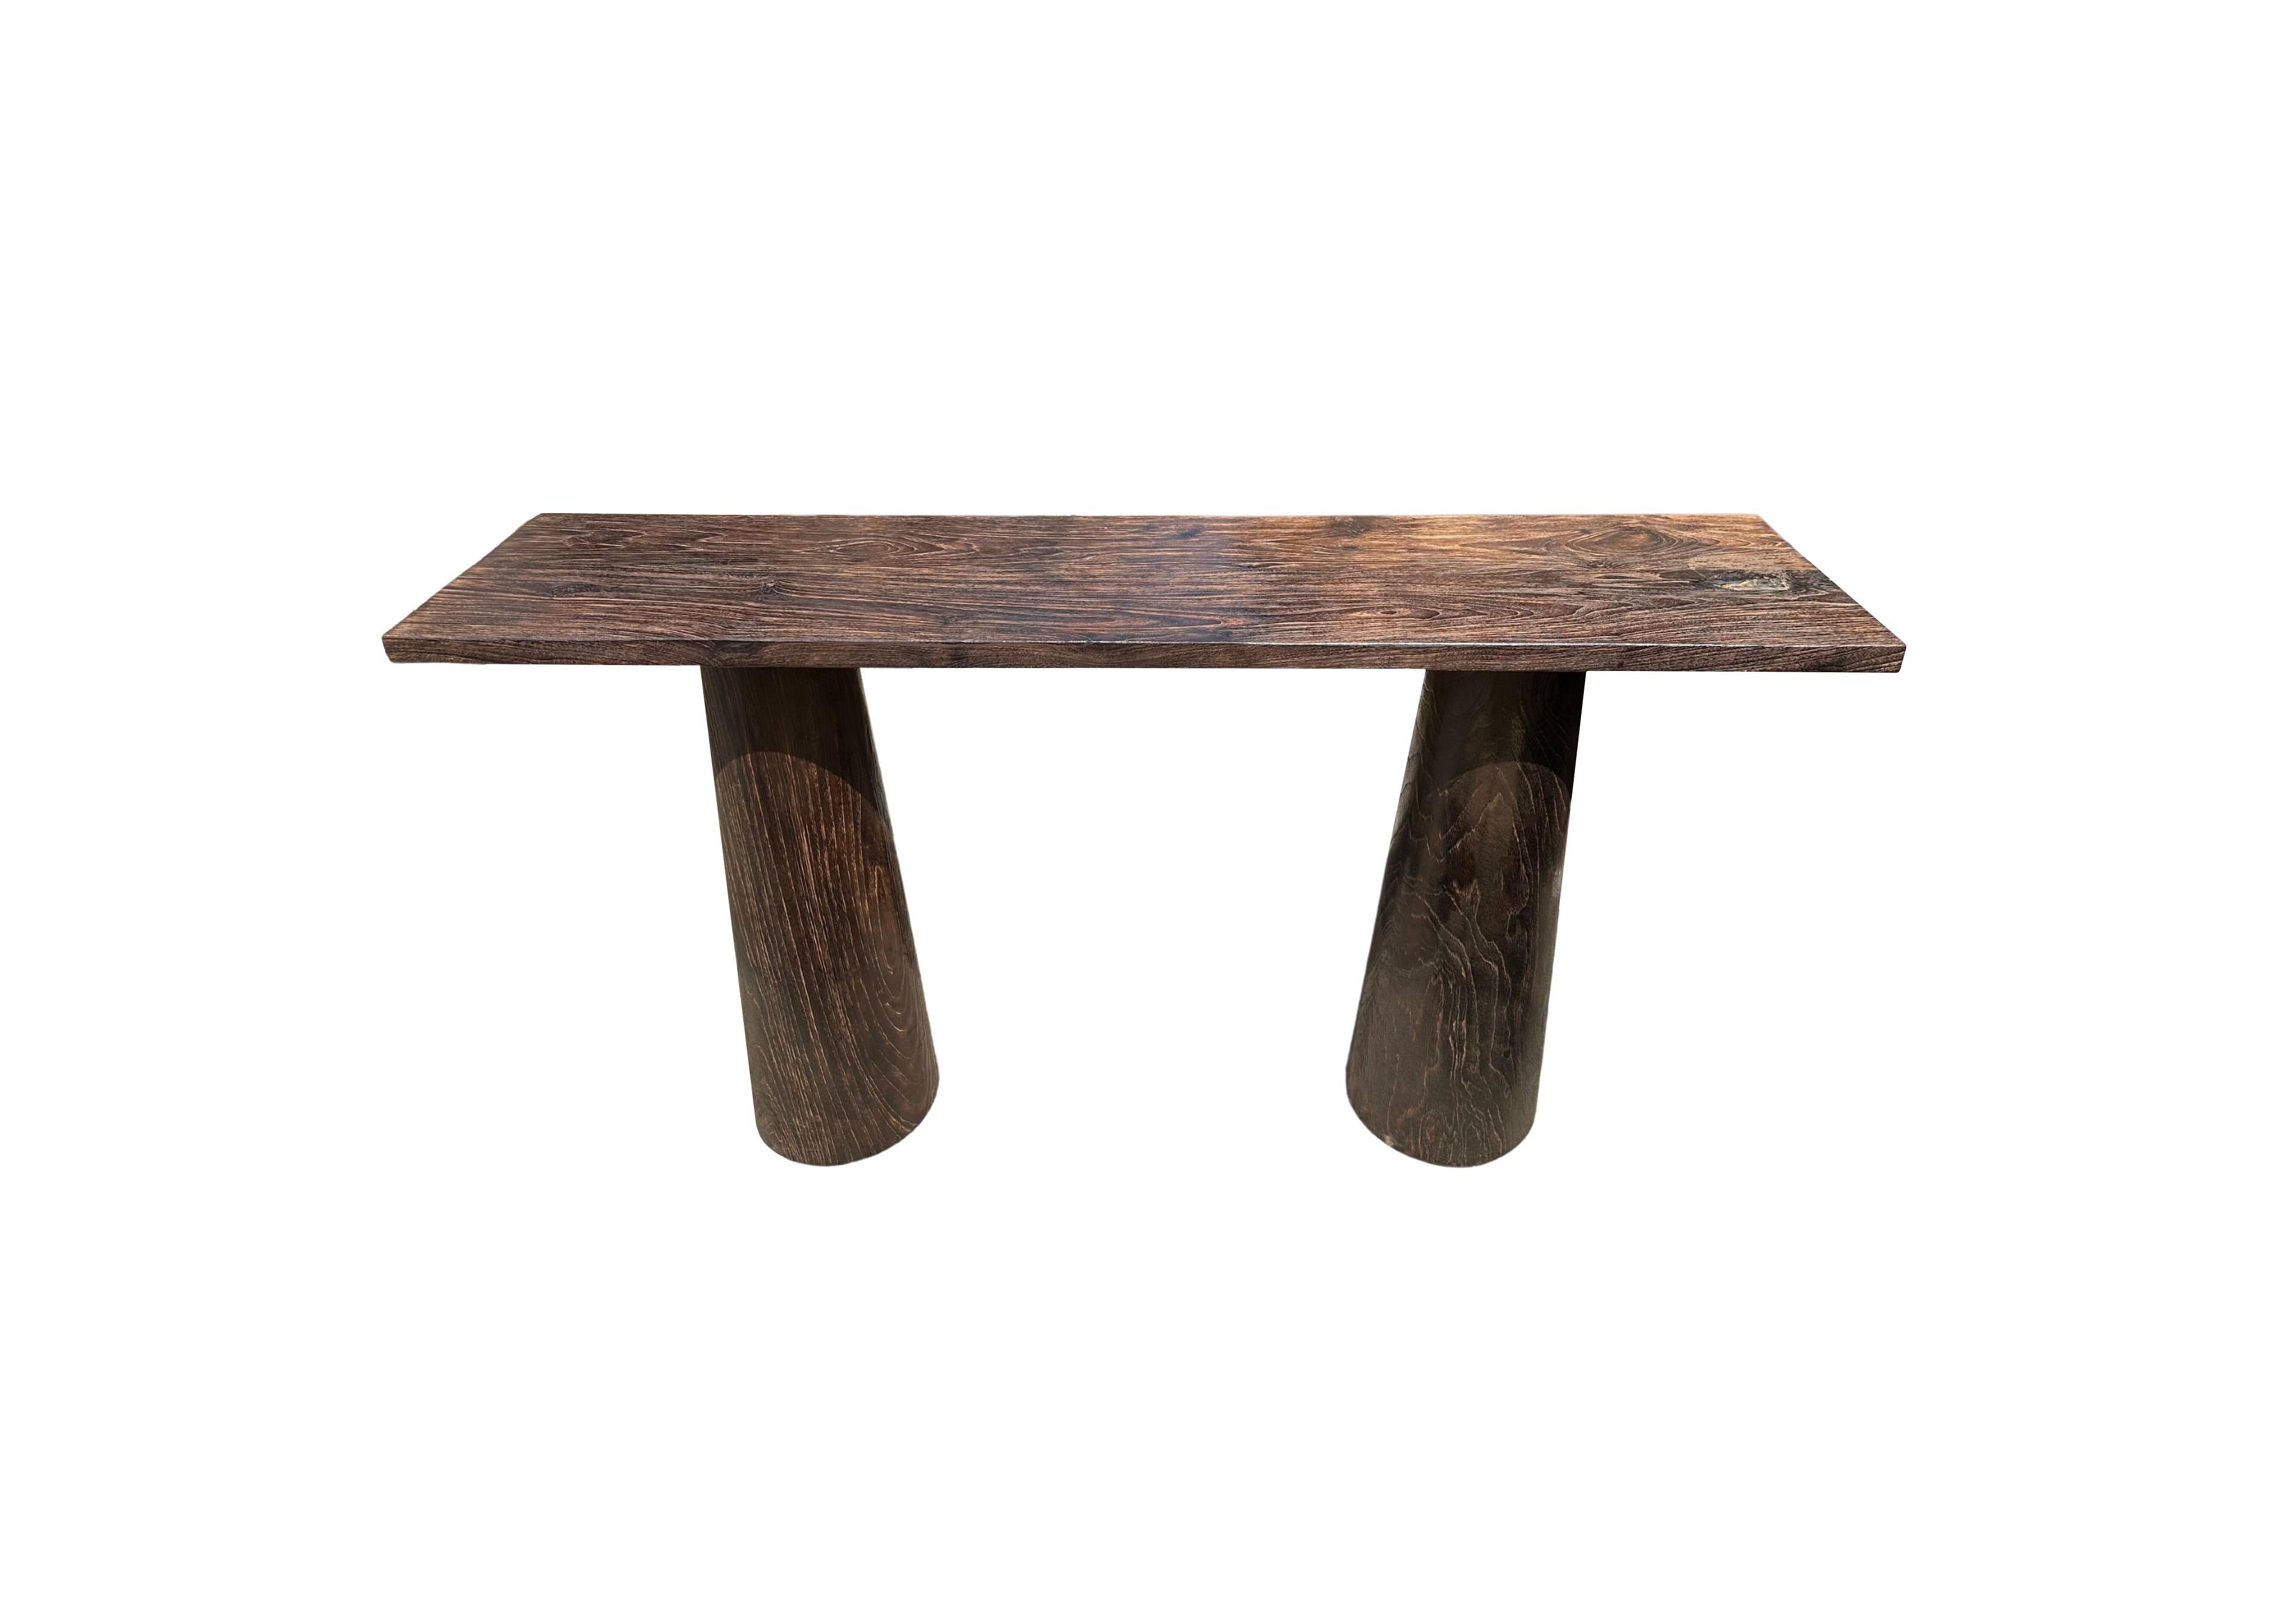 Contemporary Solid Teak Wood Console Table, Burnt Finish Modern Organic For Sale